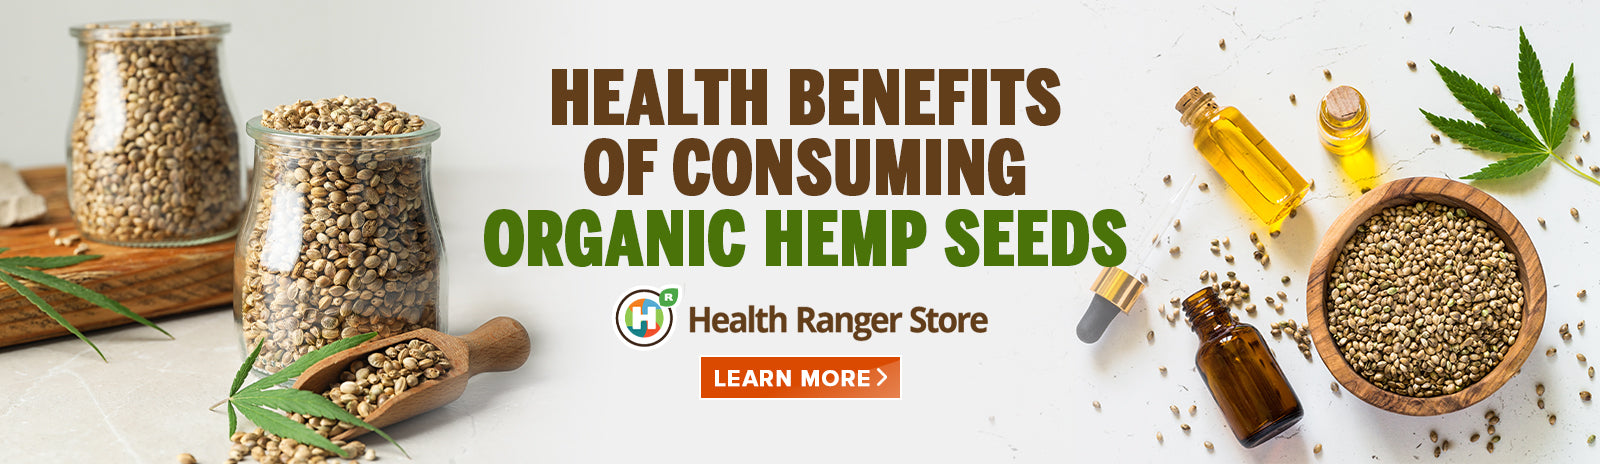 Health benefits you get from adding organic hemp seeds to your diet